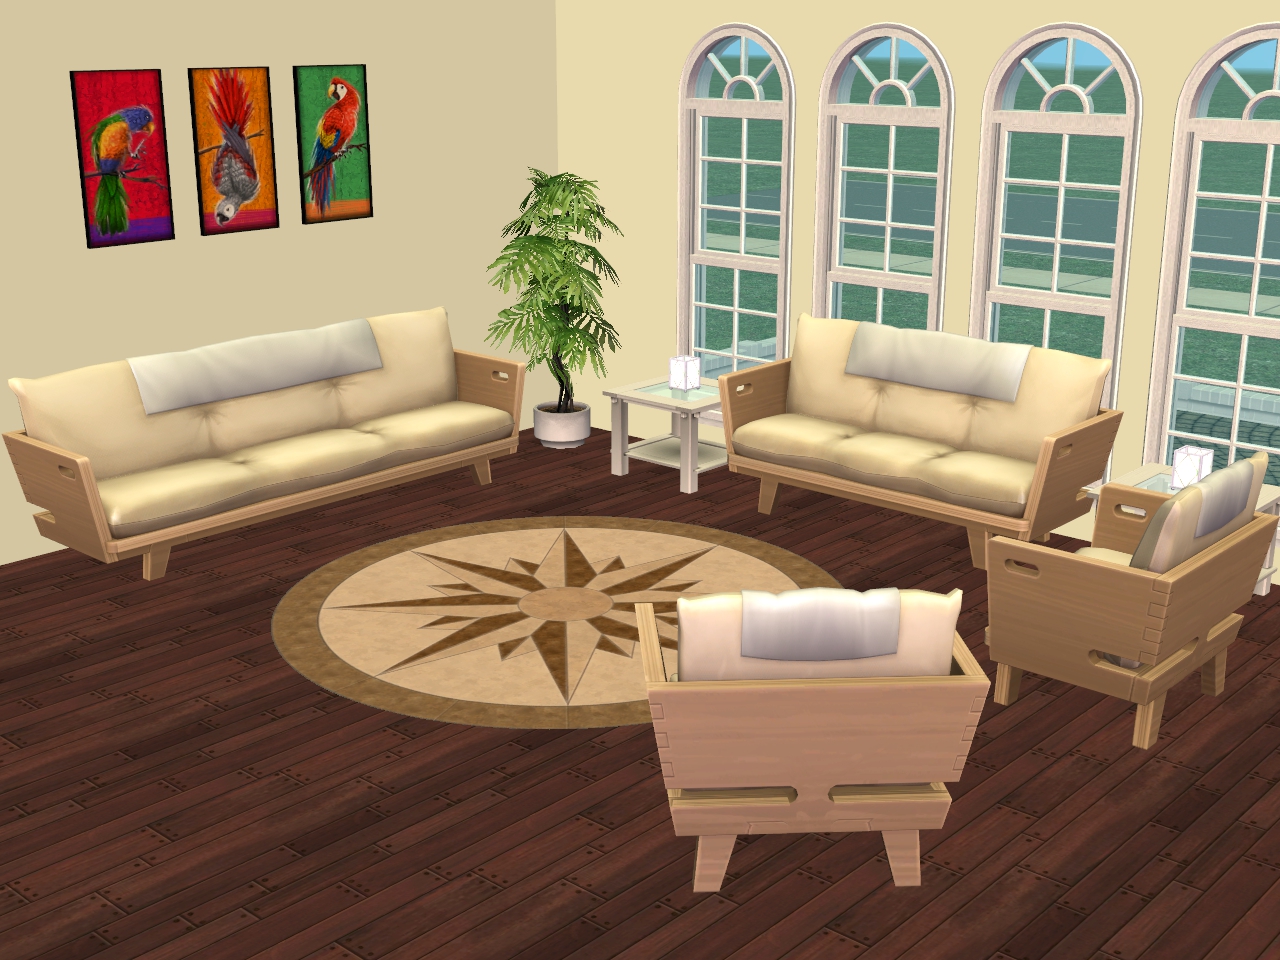 the sims 2 living room